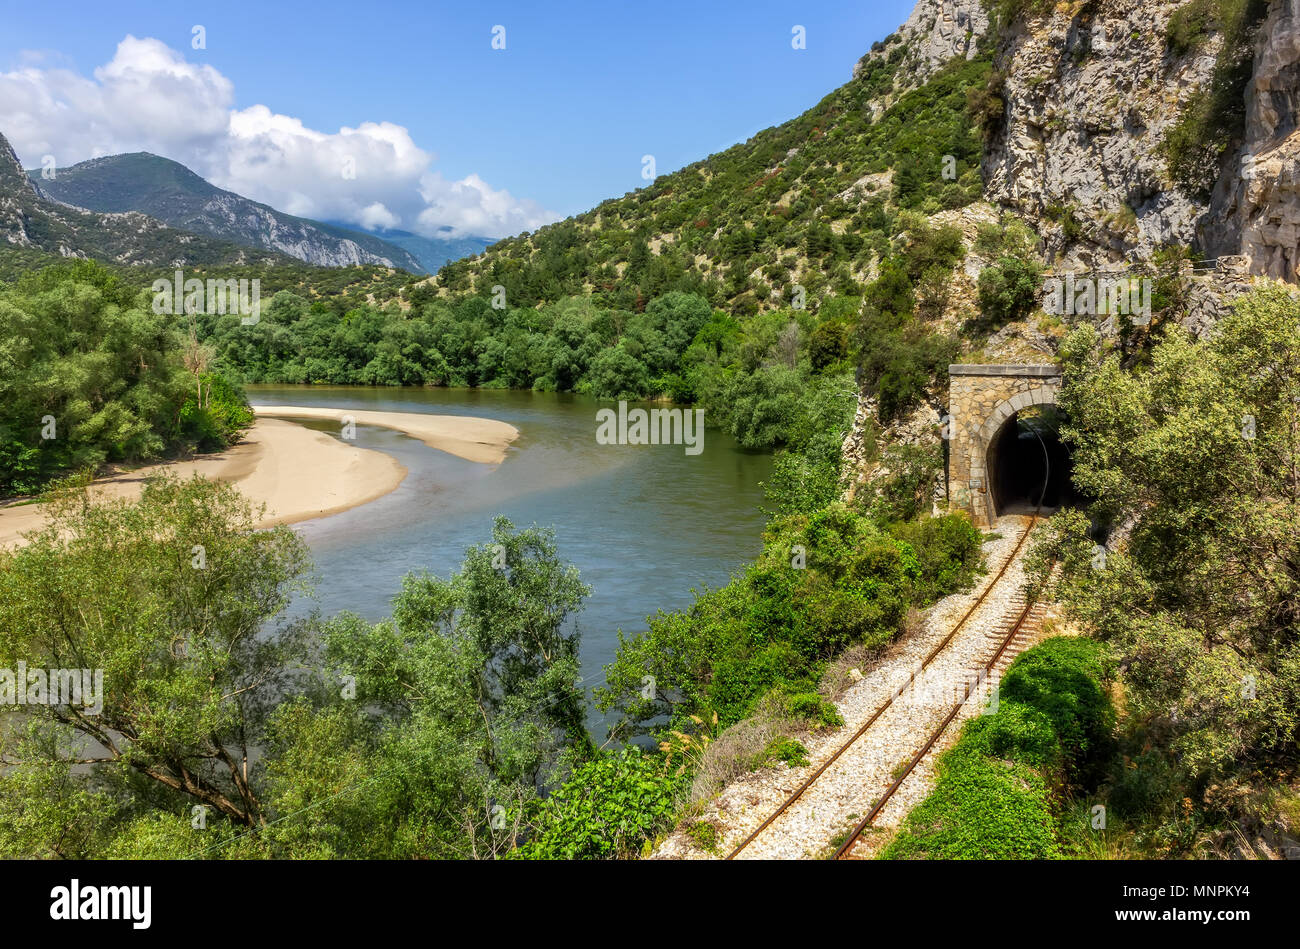 Mountain landscape close to river Nestos in Greece with railways. Stock Photo